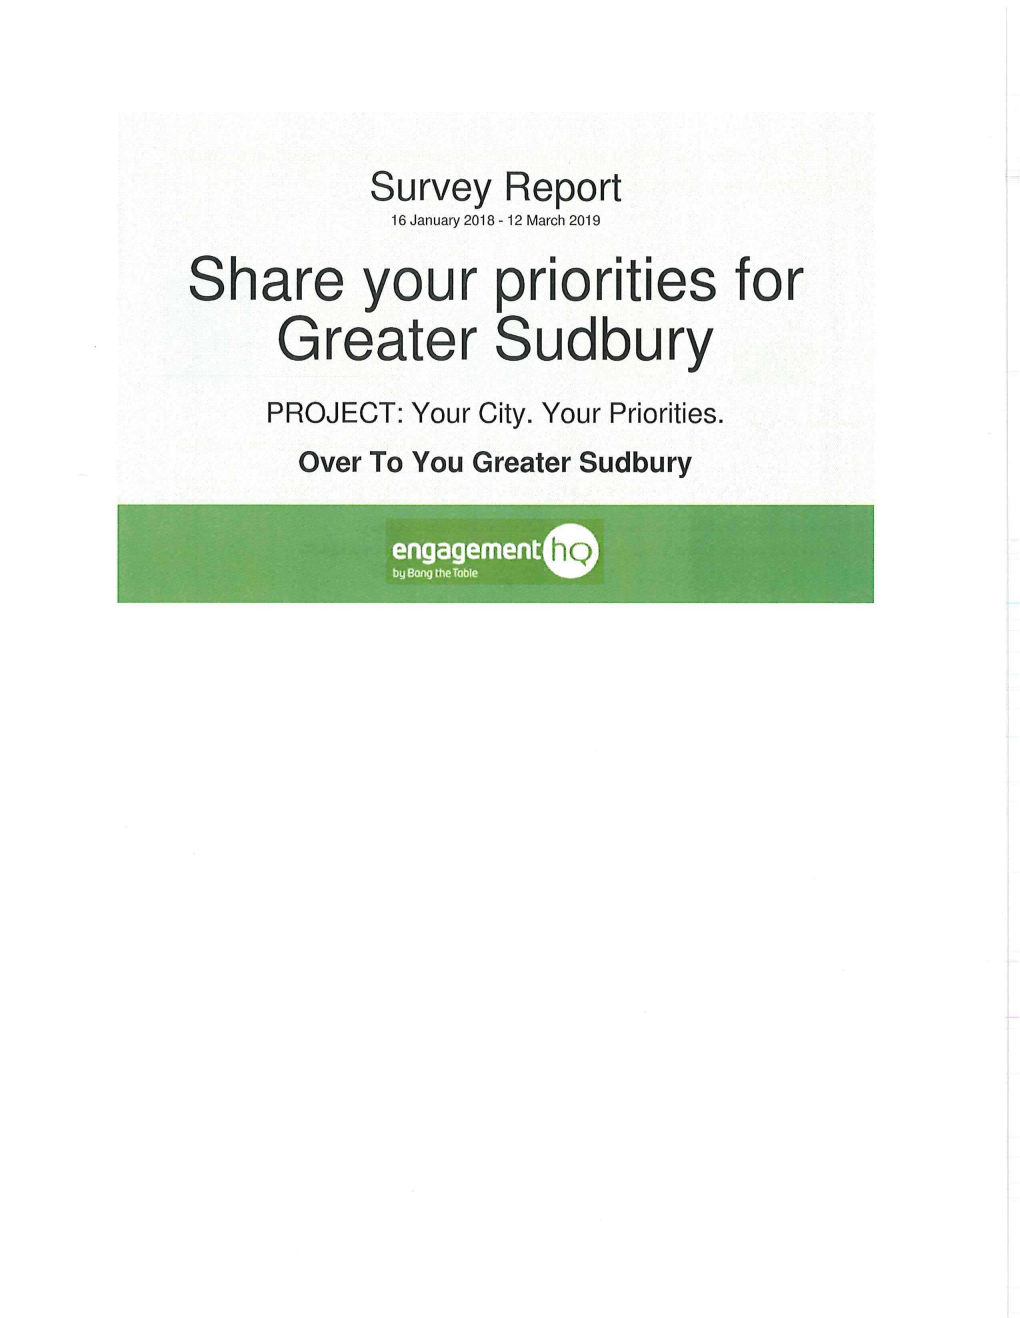 Share Your Priorities for Greater Sudbury